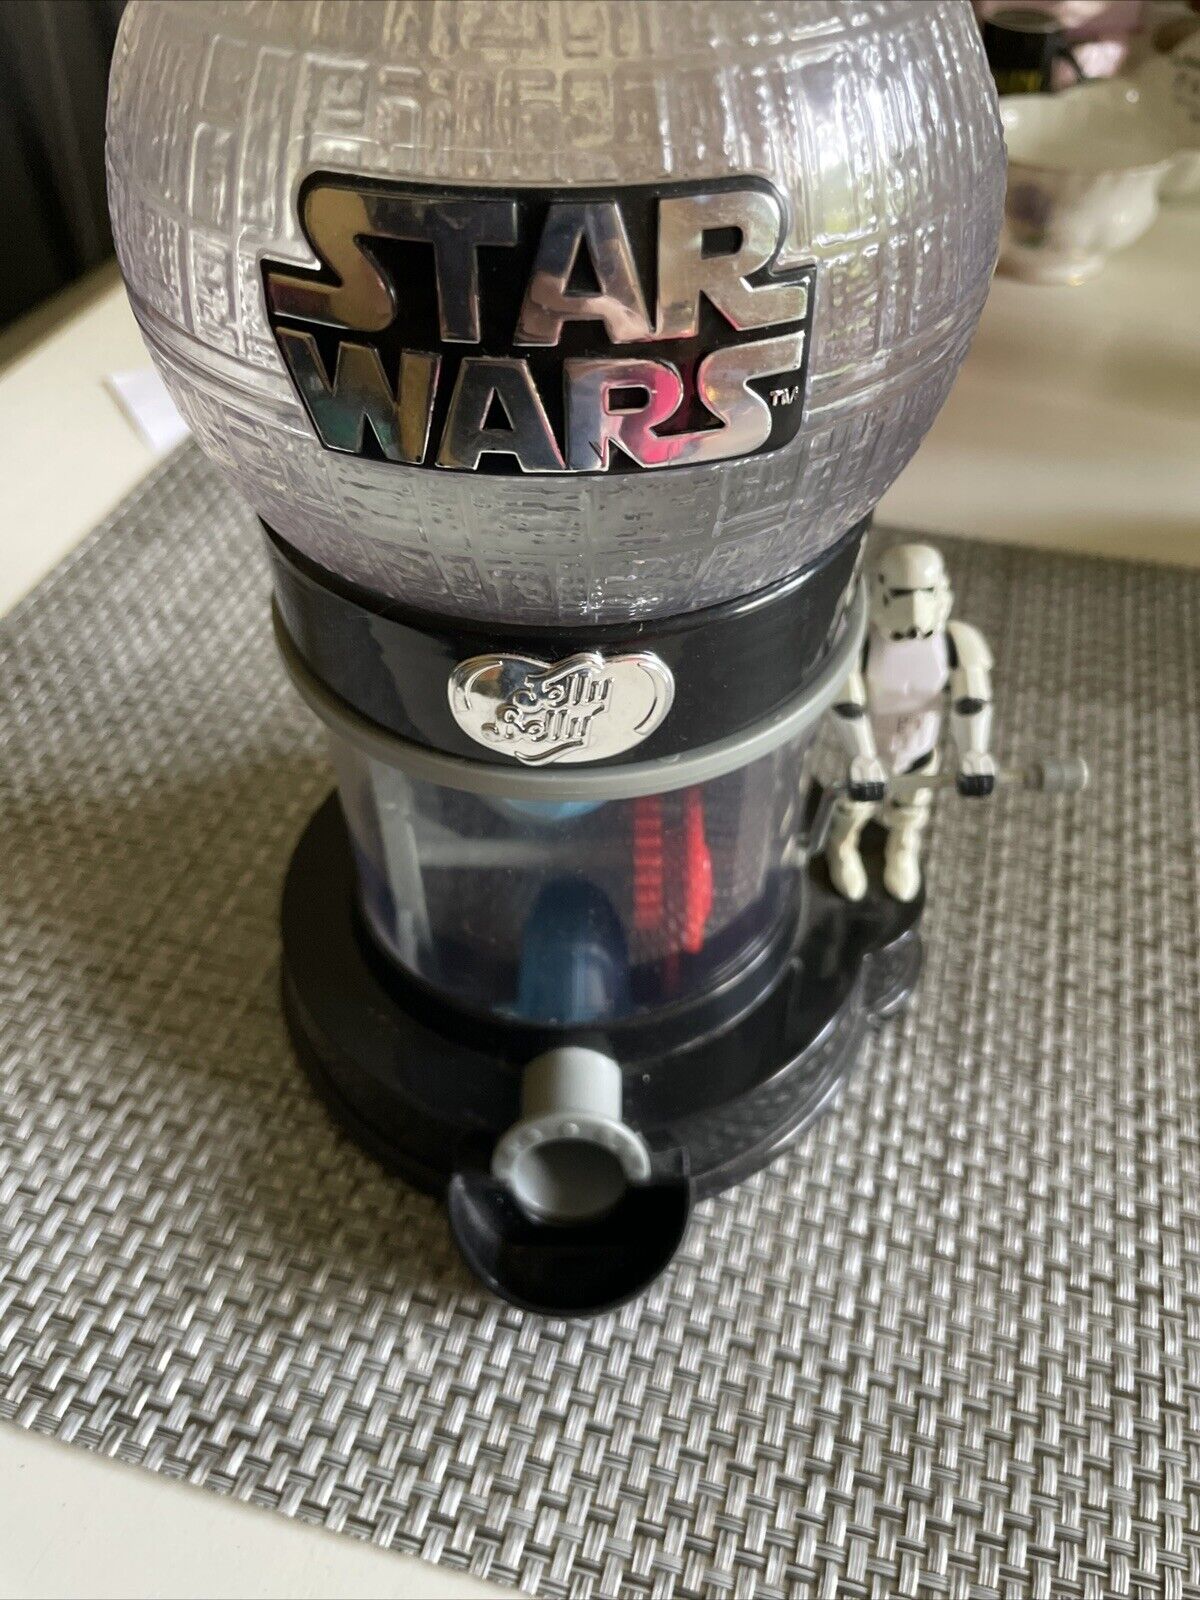 STAR WARS Jelly Belly Death Star Candy Dispenser with Stormtrooper